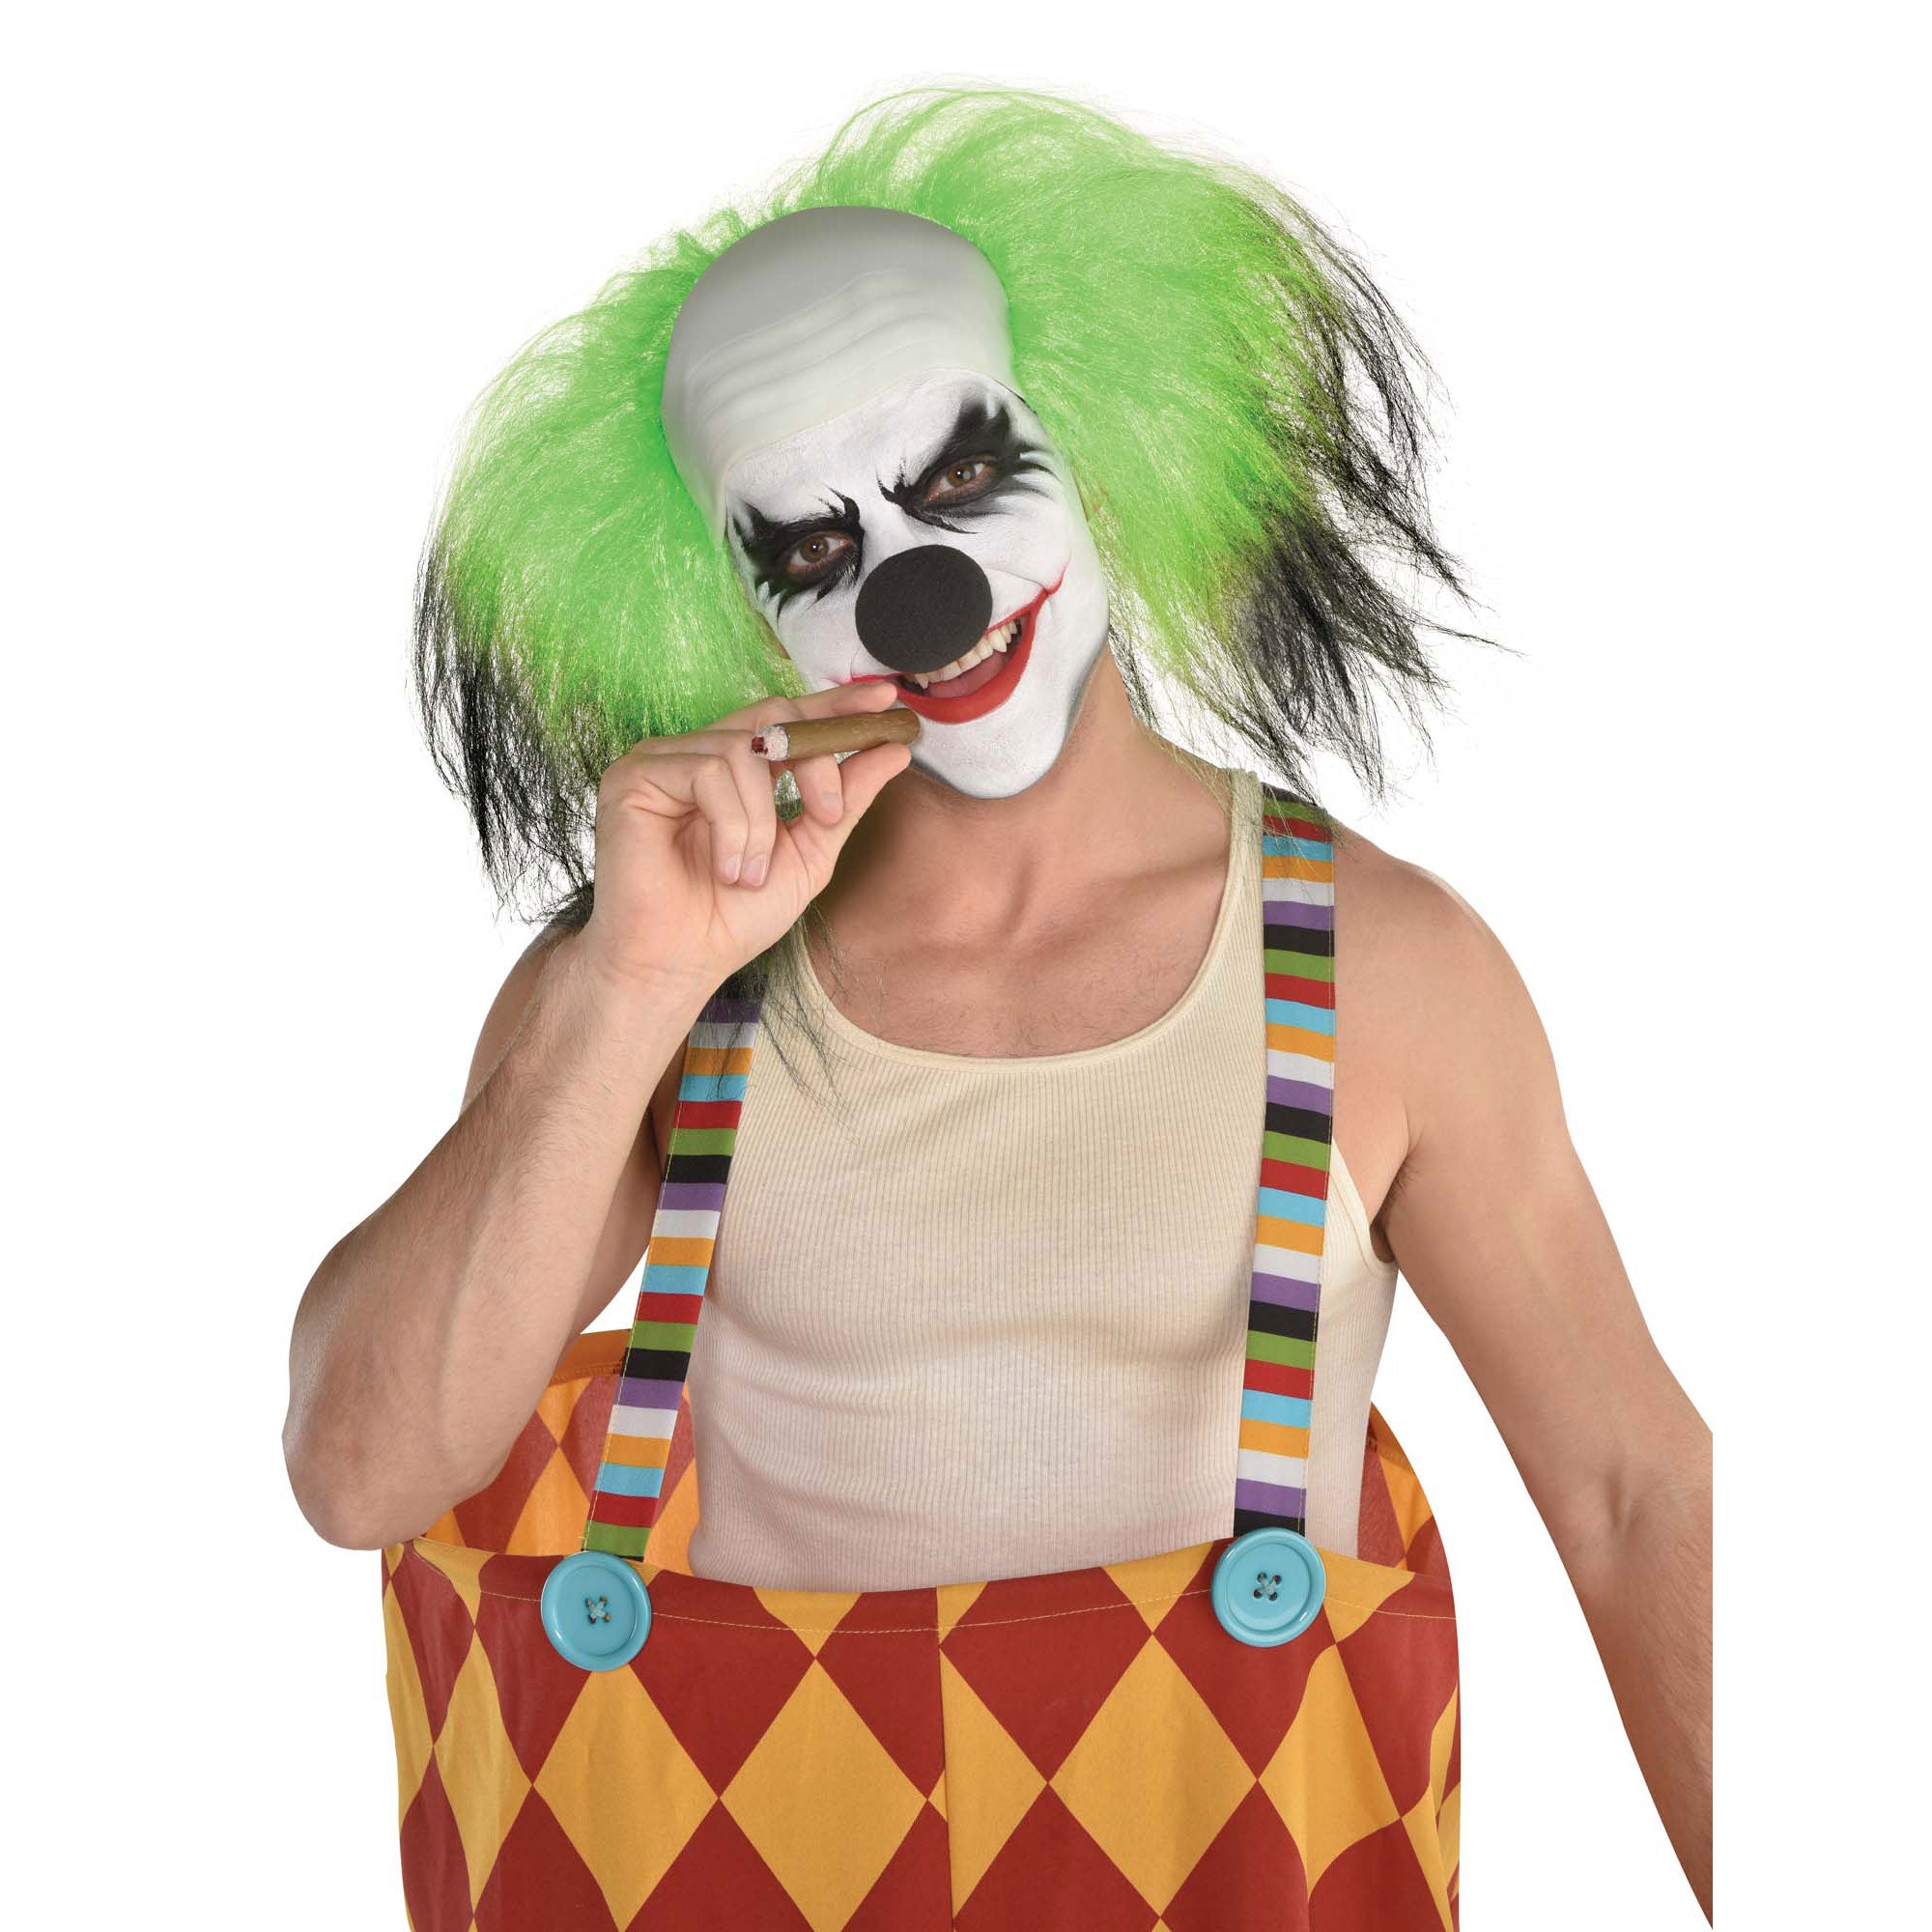 Sinister Clown Wig